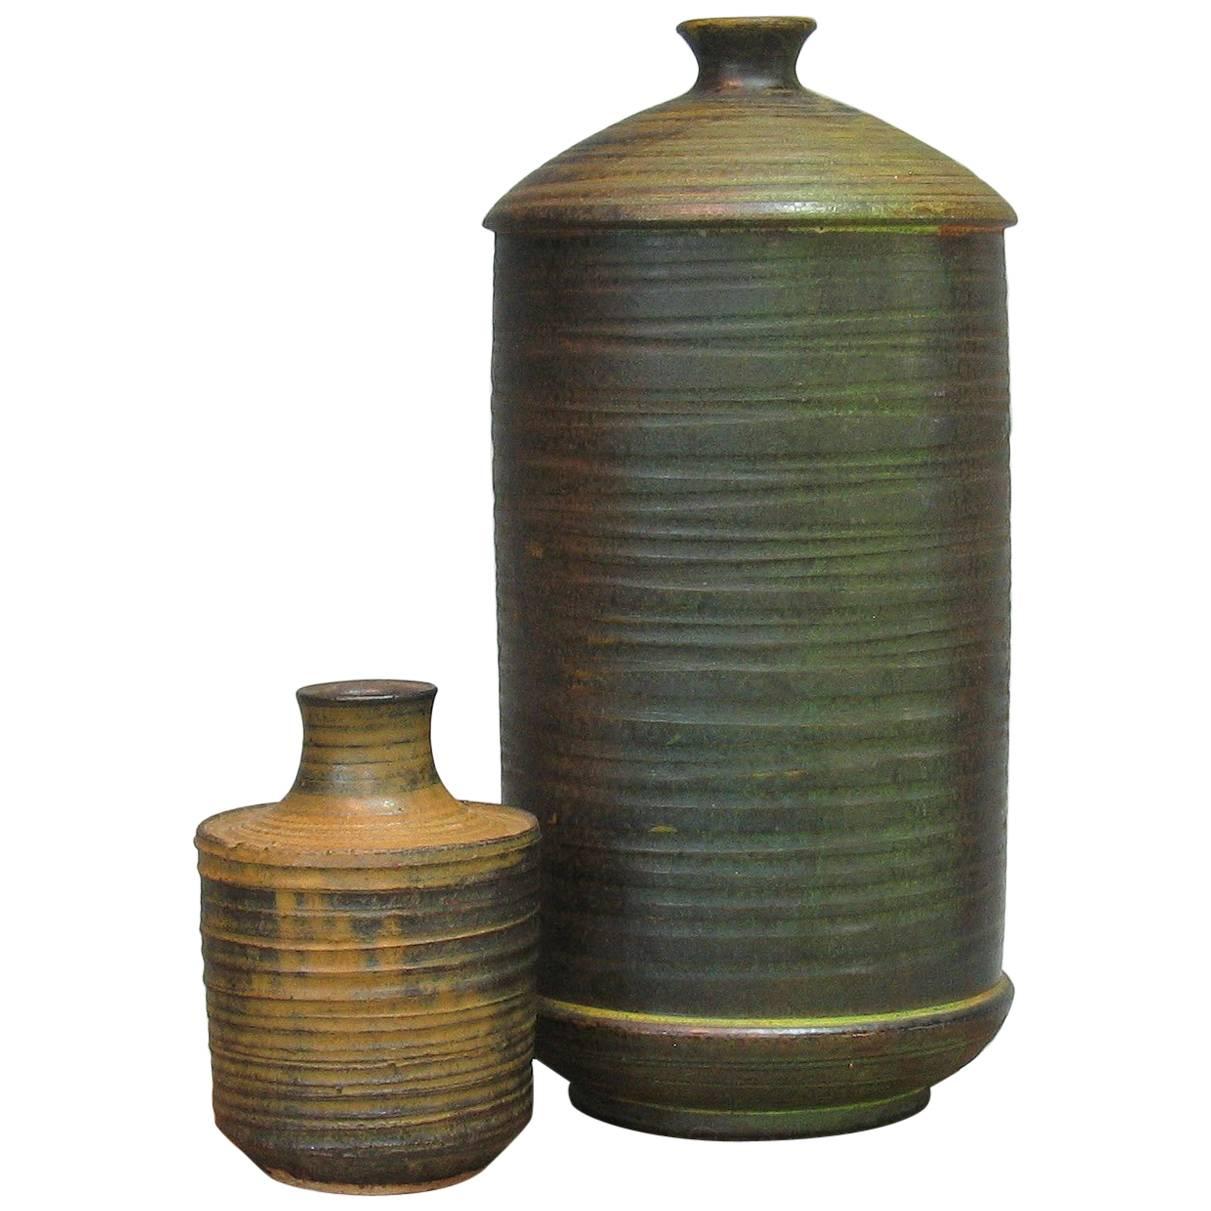 Complimentary Pair of Cylindrical Art Pottery Vases